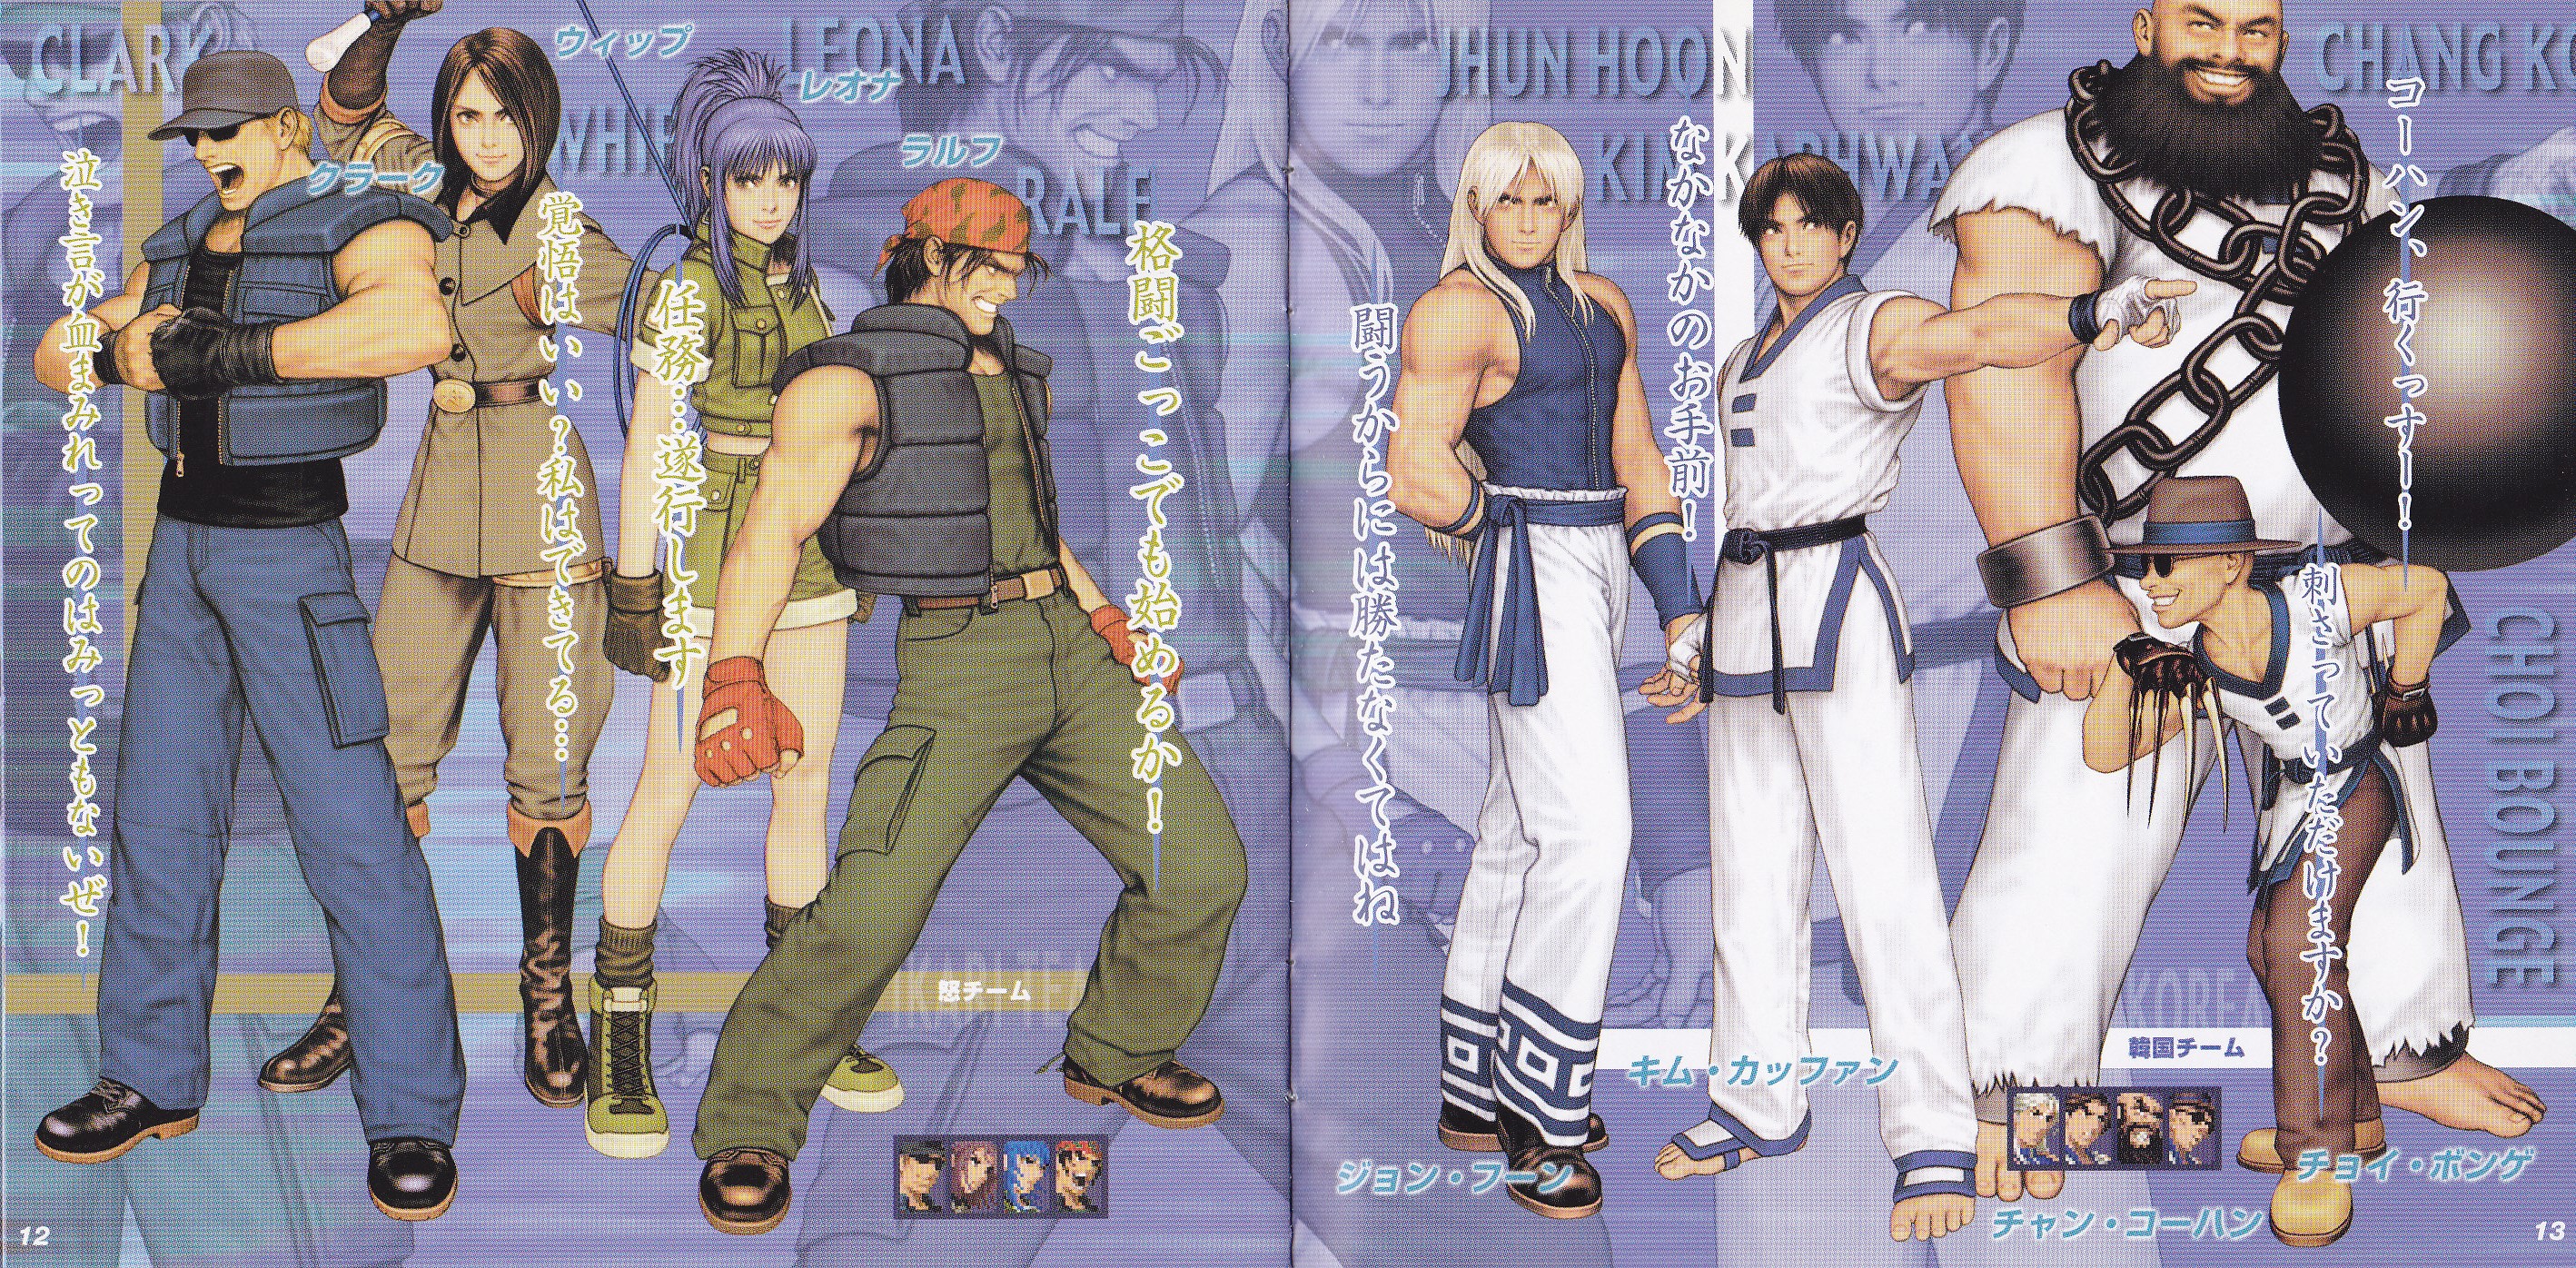 King - Characters & Art - King of Fighters 2000